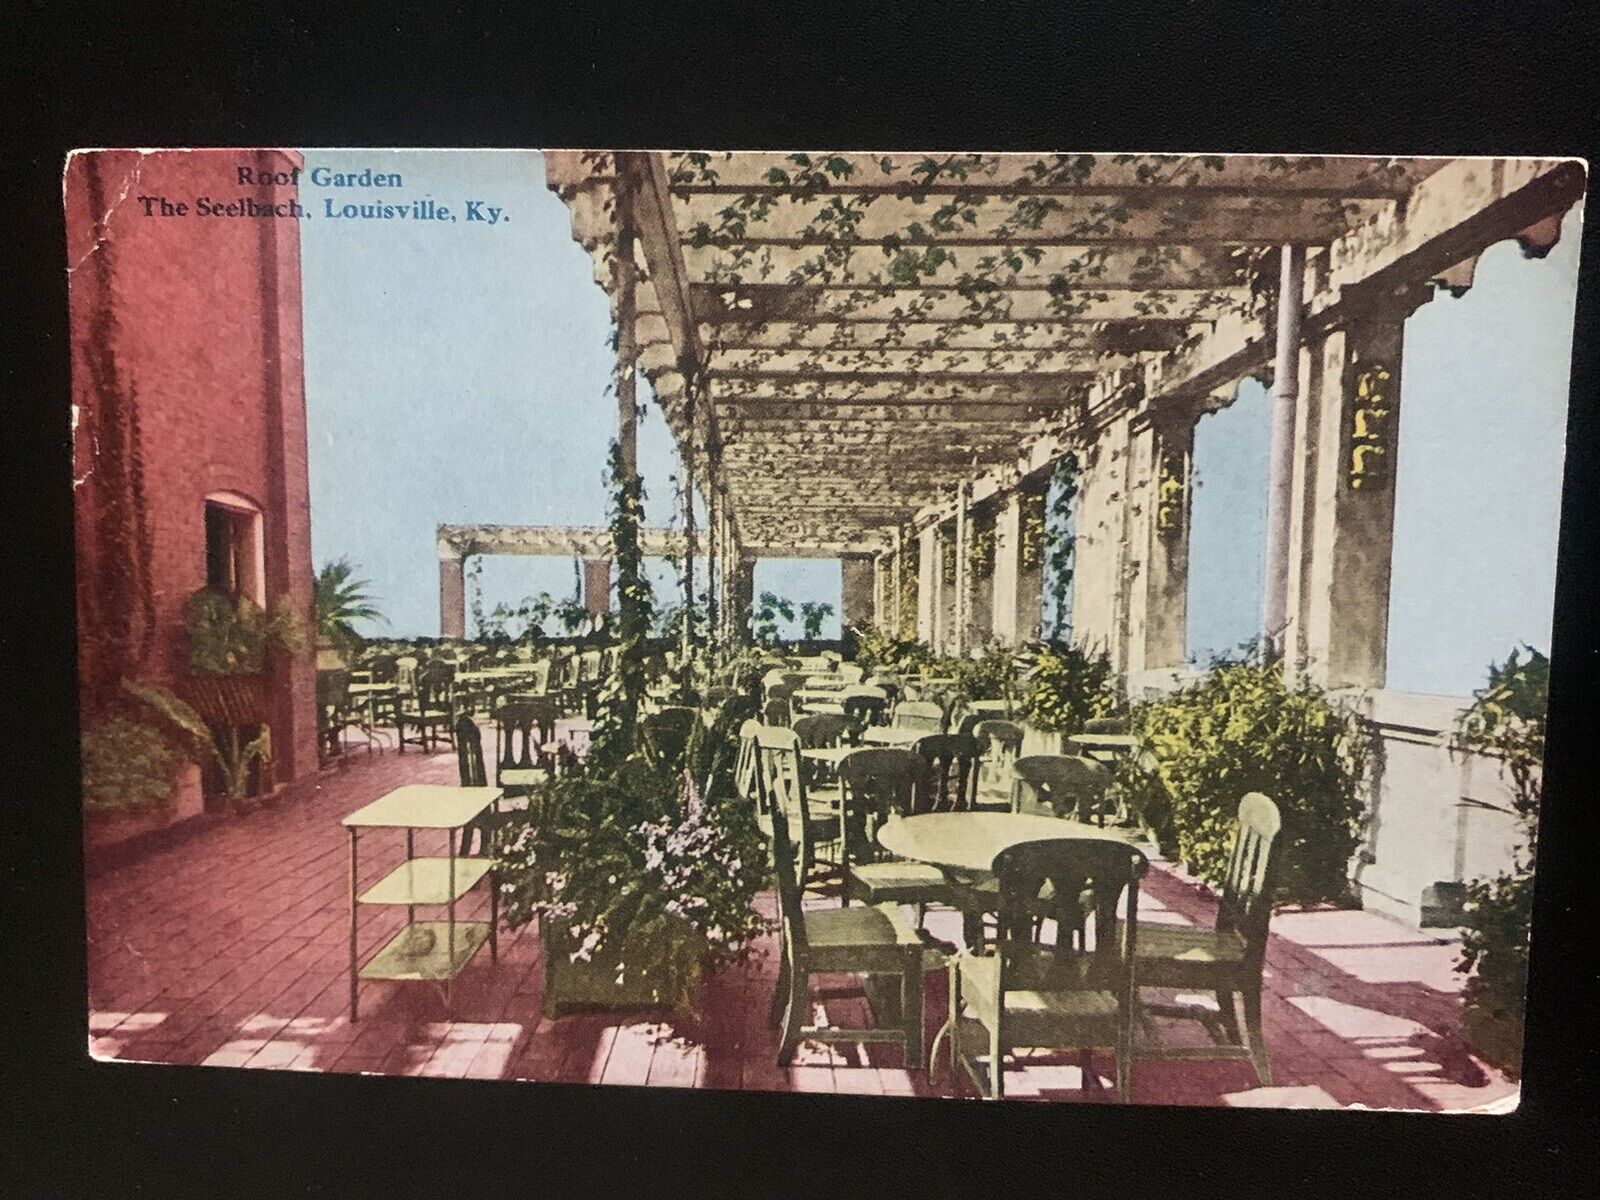 Roof Garden The Seelbach, Louisville, KY. Vintage Postcard Posted 1912